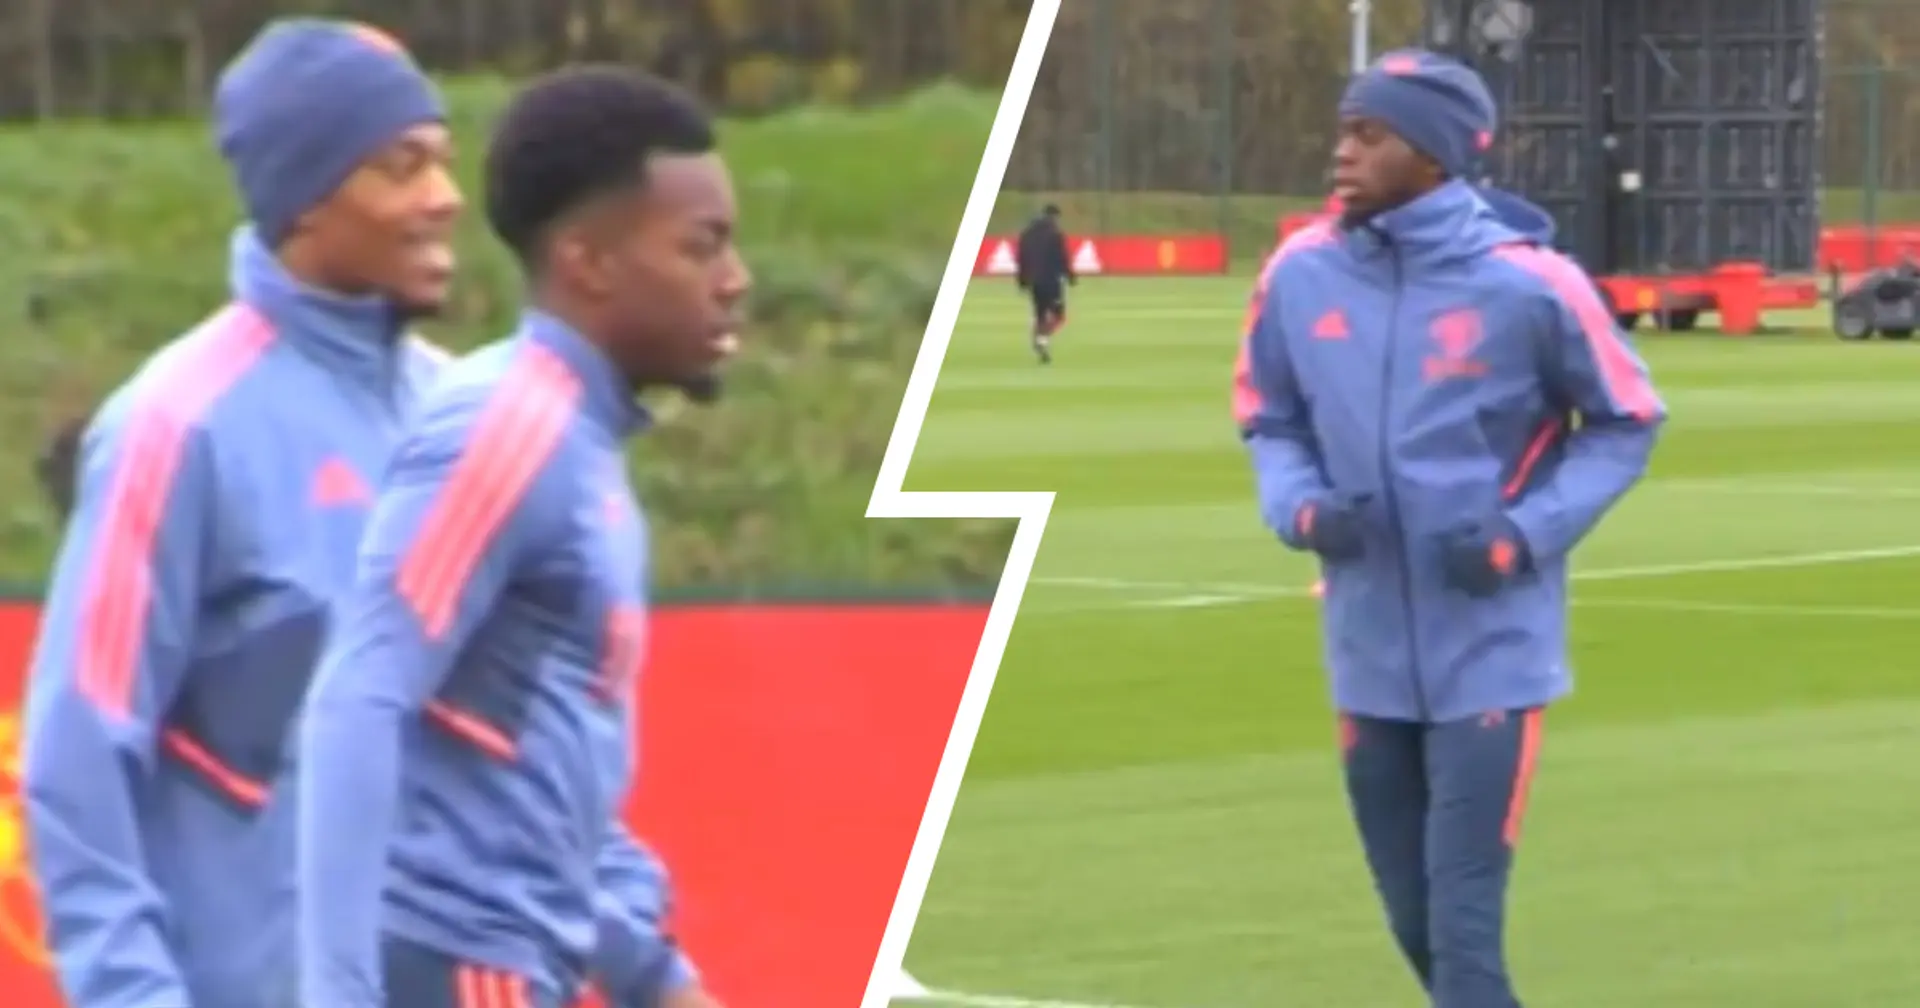 Martial all smiles, Wan-Bissaka back: Best pics from Man United training